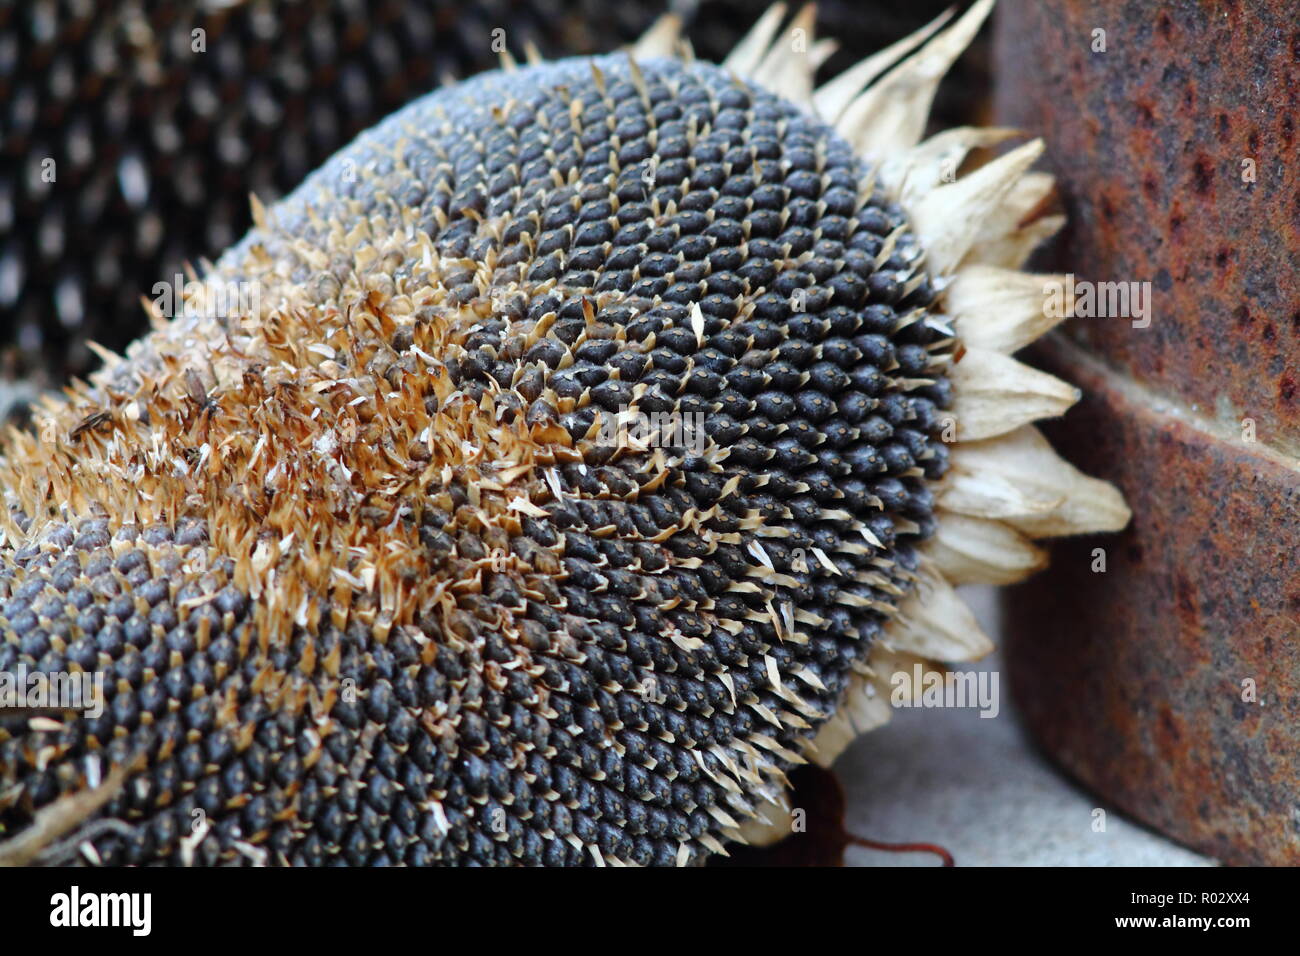 Ripe whole dry sunflowers full with seeds close up. Stock Photo